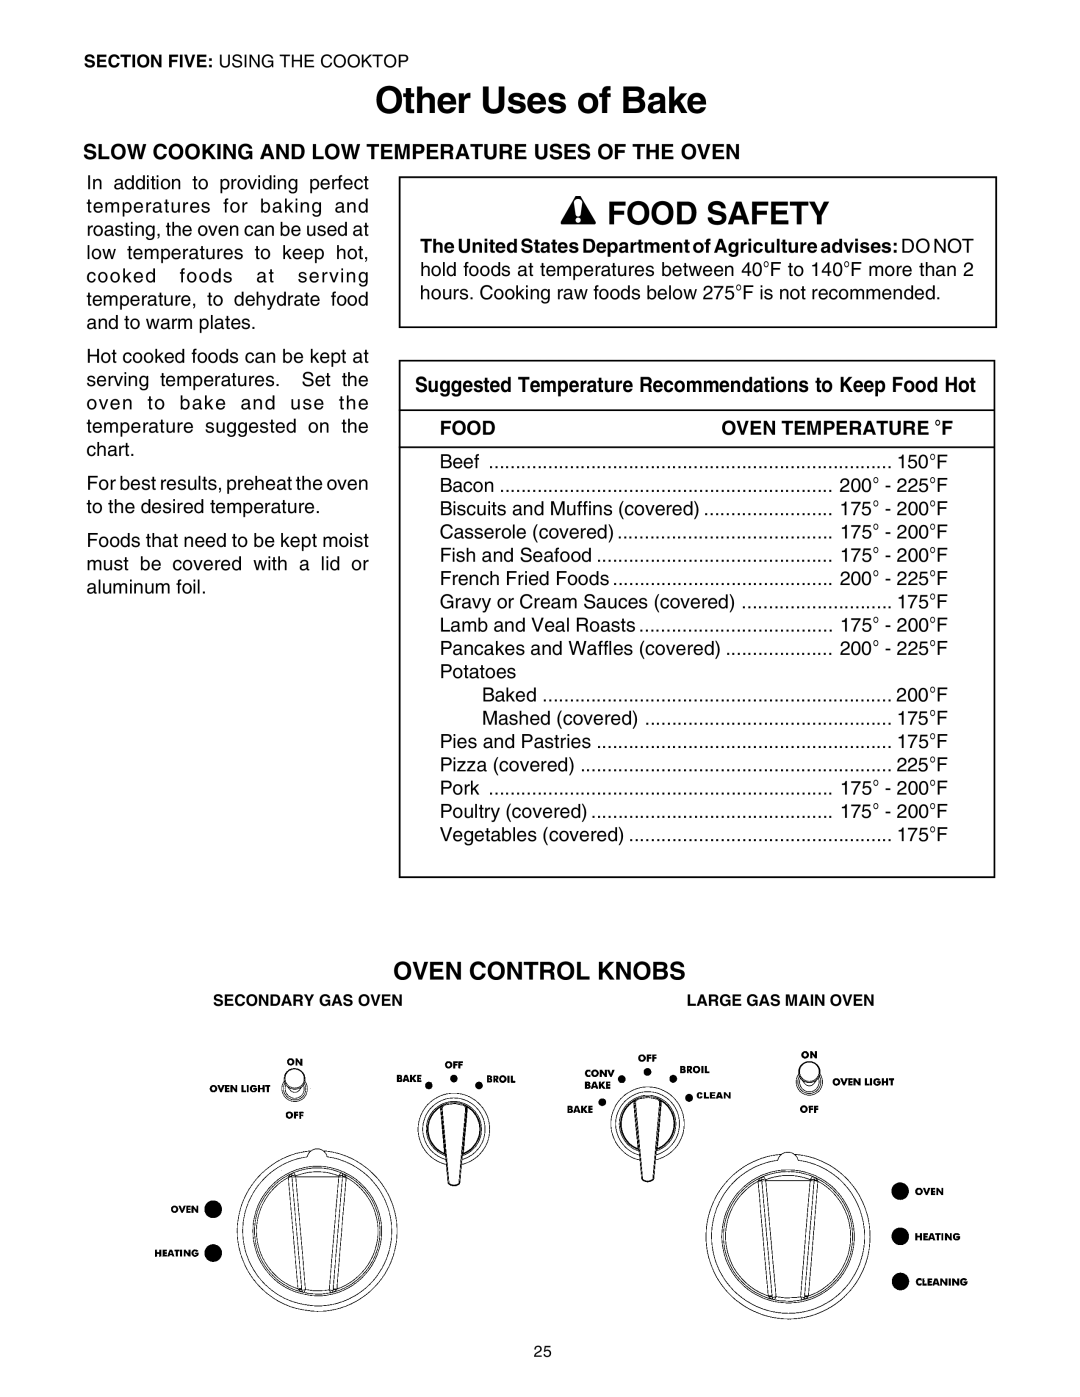 Thermador PG30 Other Uses of Bake, Food Safety, Oven Control Knobs, Slow Cooking And Low Temperature Uses Of The Oven 